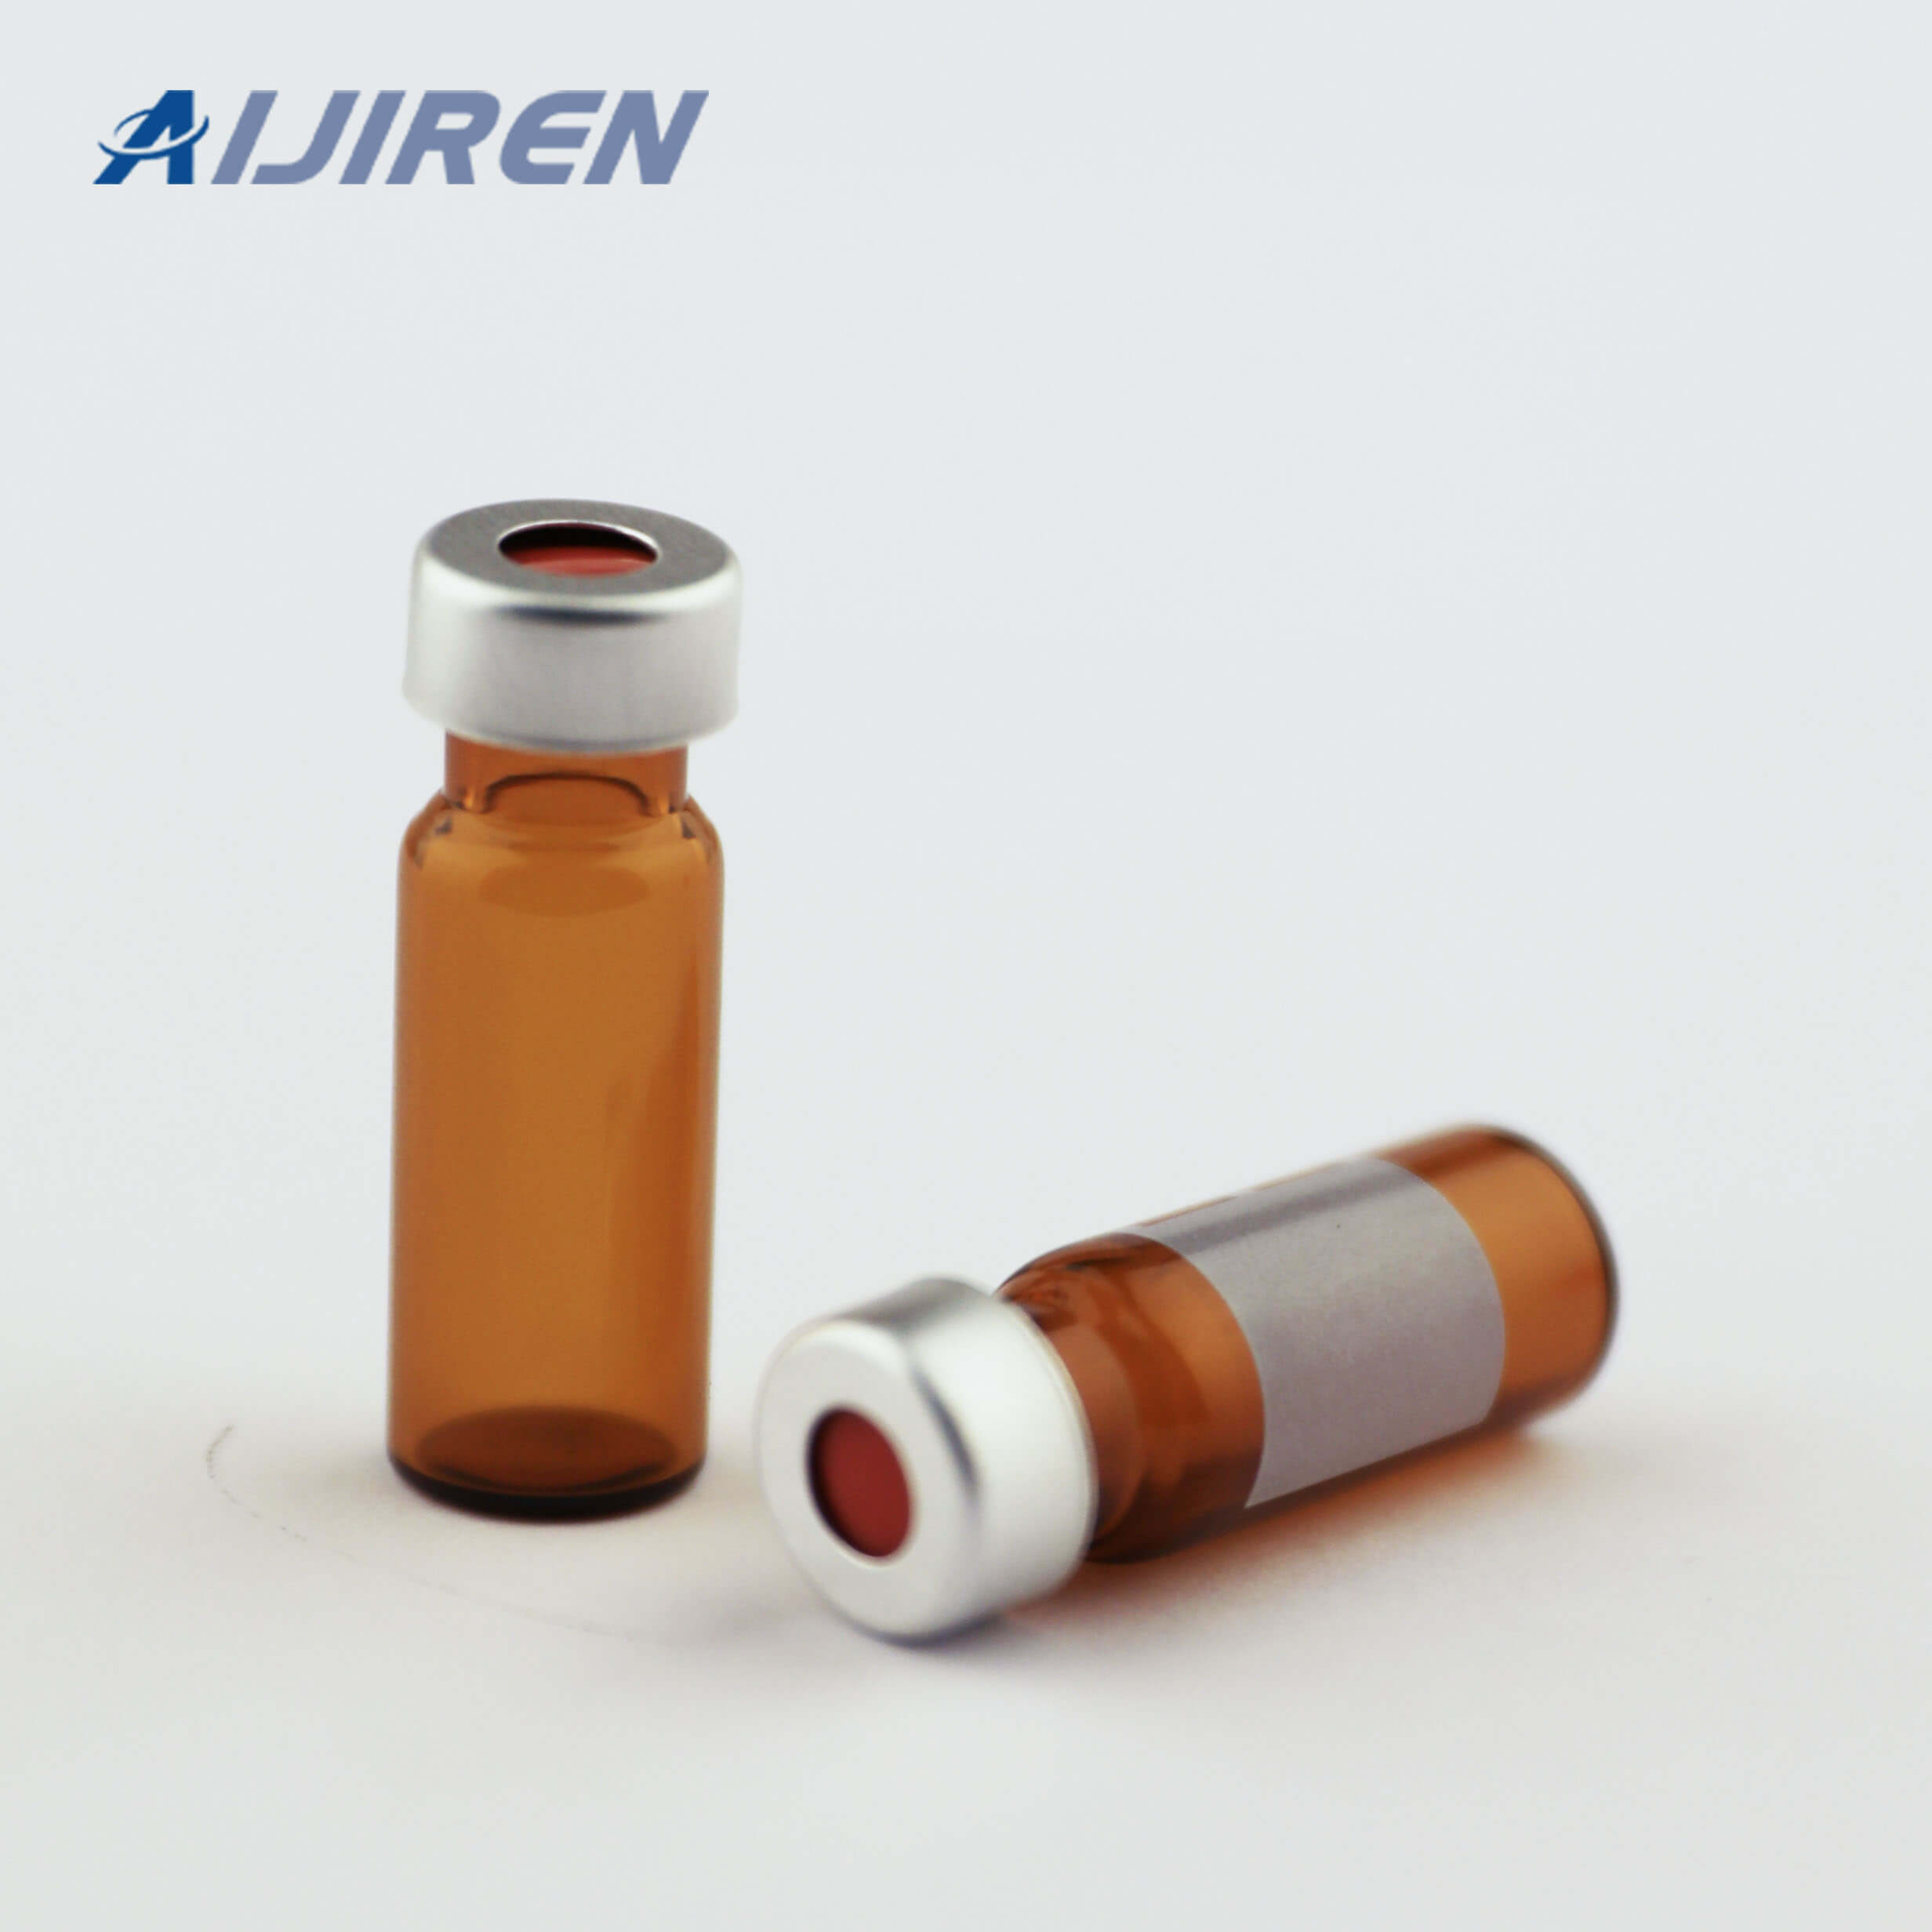 11mm Crimp Top Glass Vial for THERMO FISHER